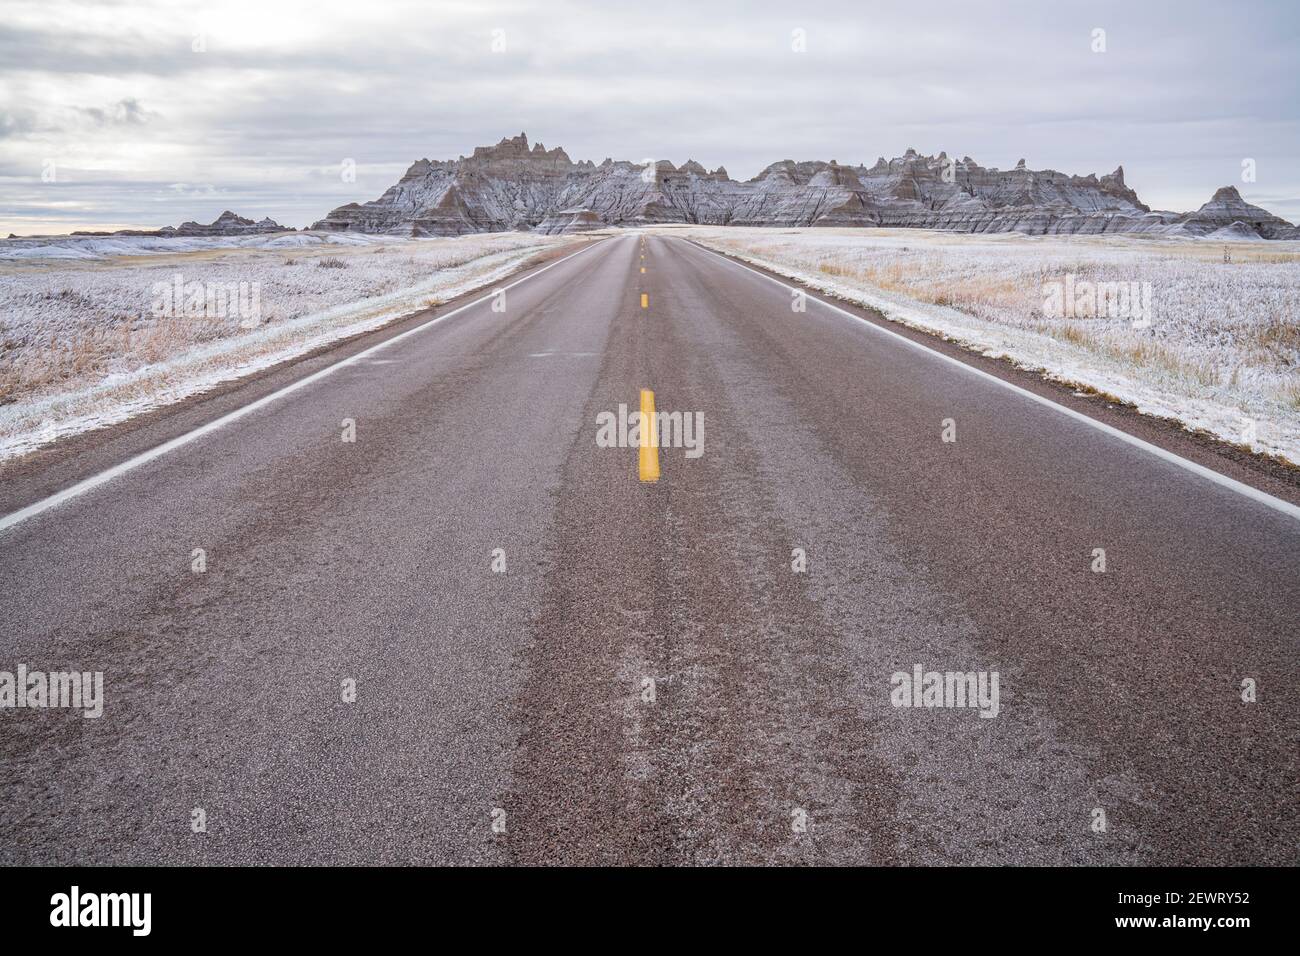 The road to the Badlands, Badlands National Park, South Dakota, United States of America, North America Stock Photo